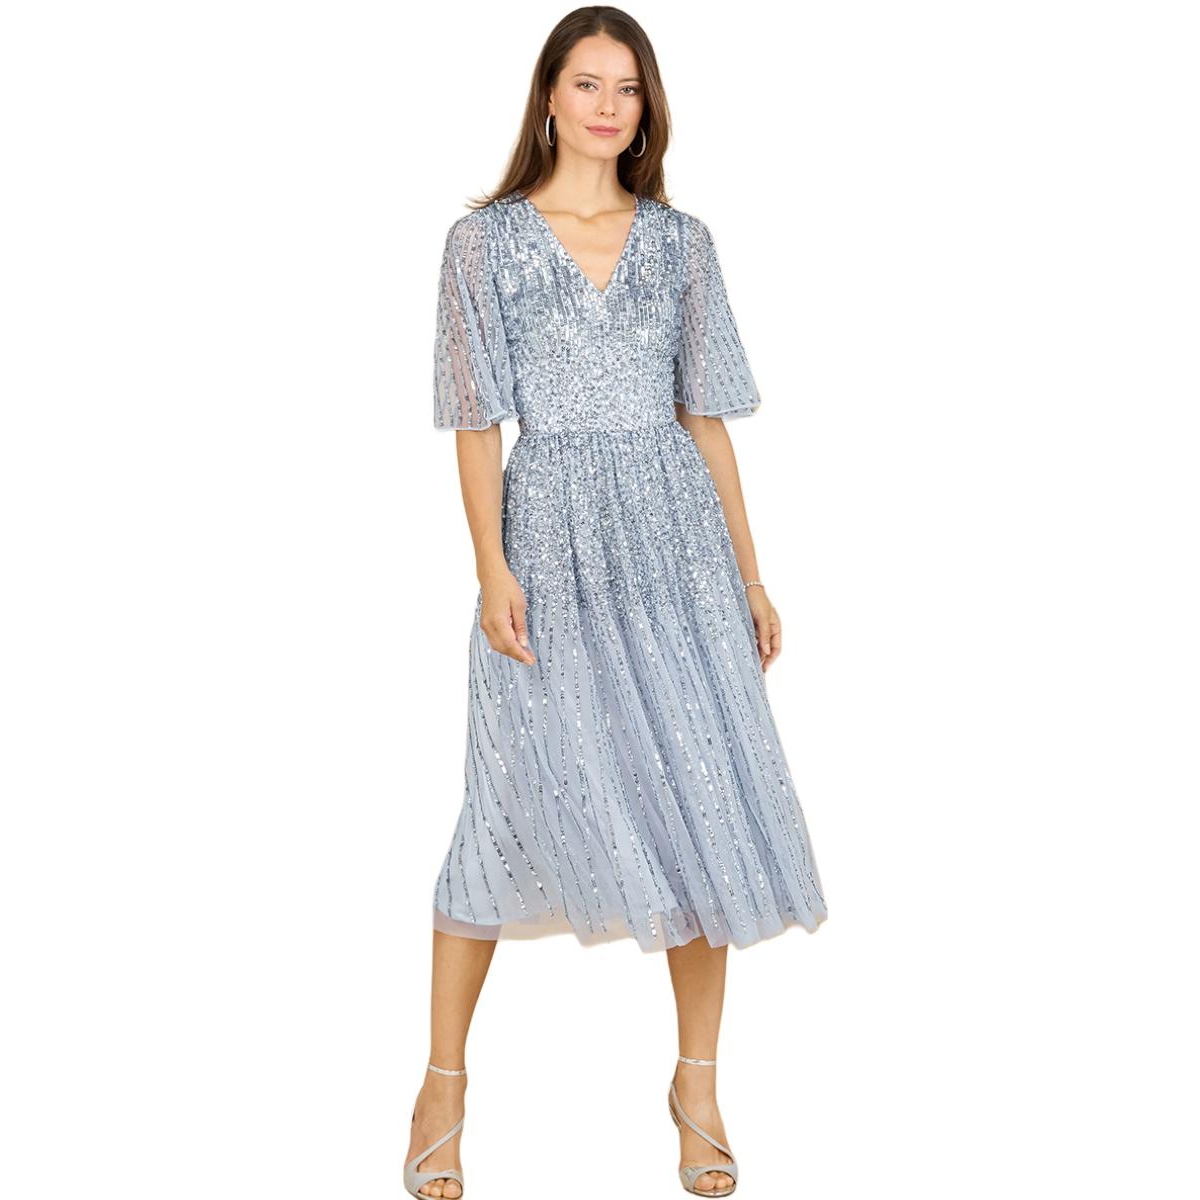 Women's Flowing, Sequin Midi Dress with Short Sleeves - Periwinkle